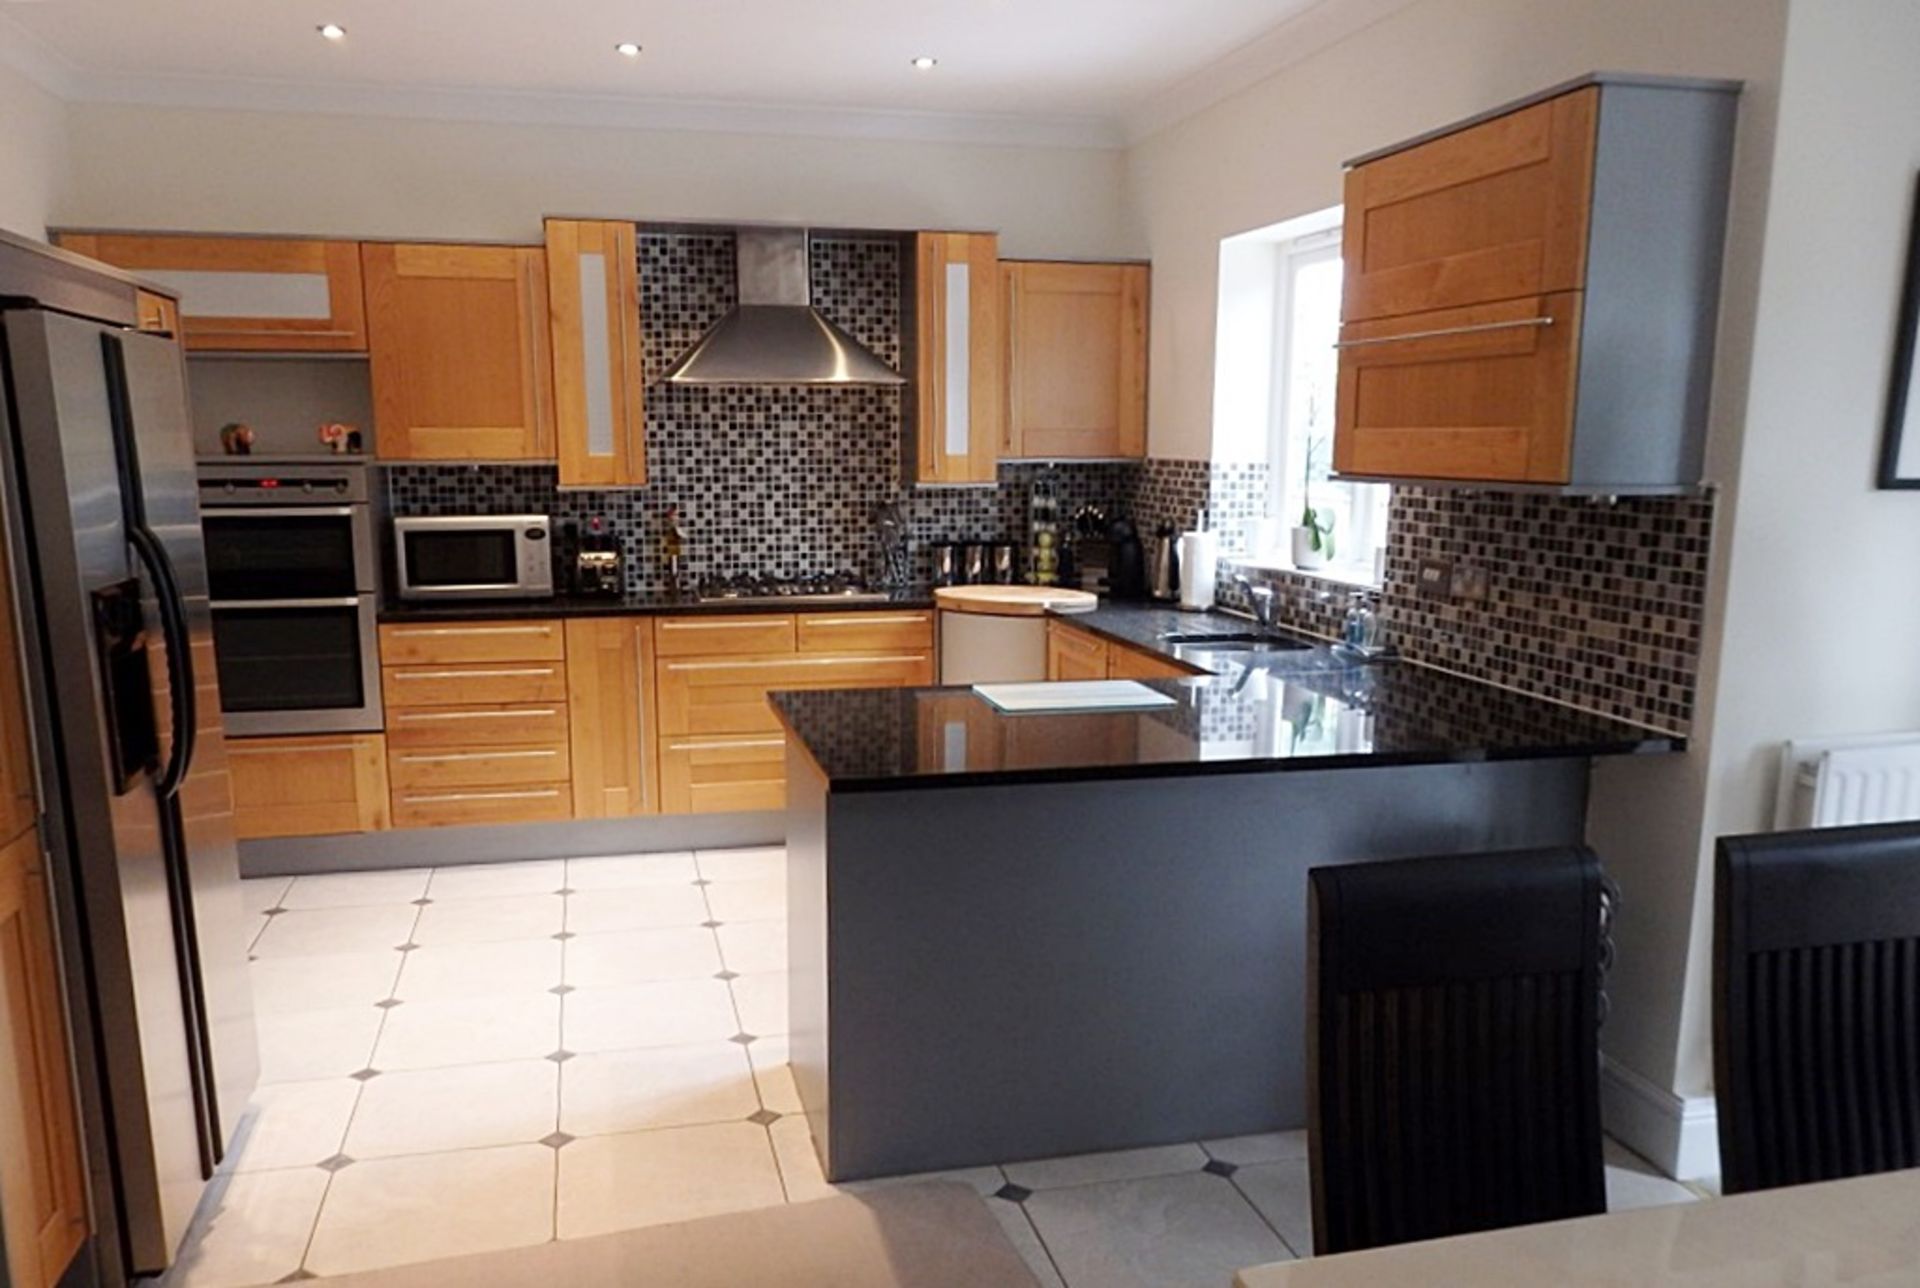 1 x Solid Wood Fitted Kitchen By Panorama - Features Luxurious Black Granite Worktops, Integrated - Image 3 of 31